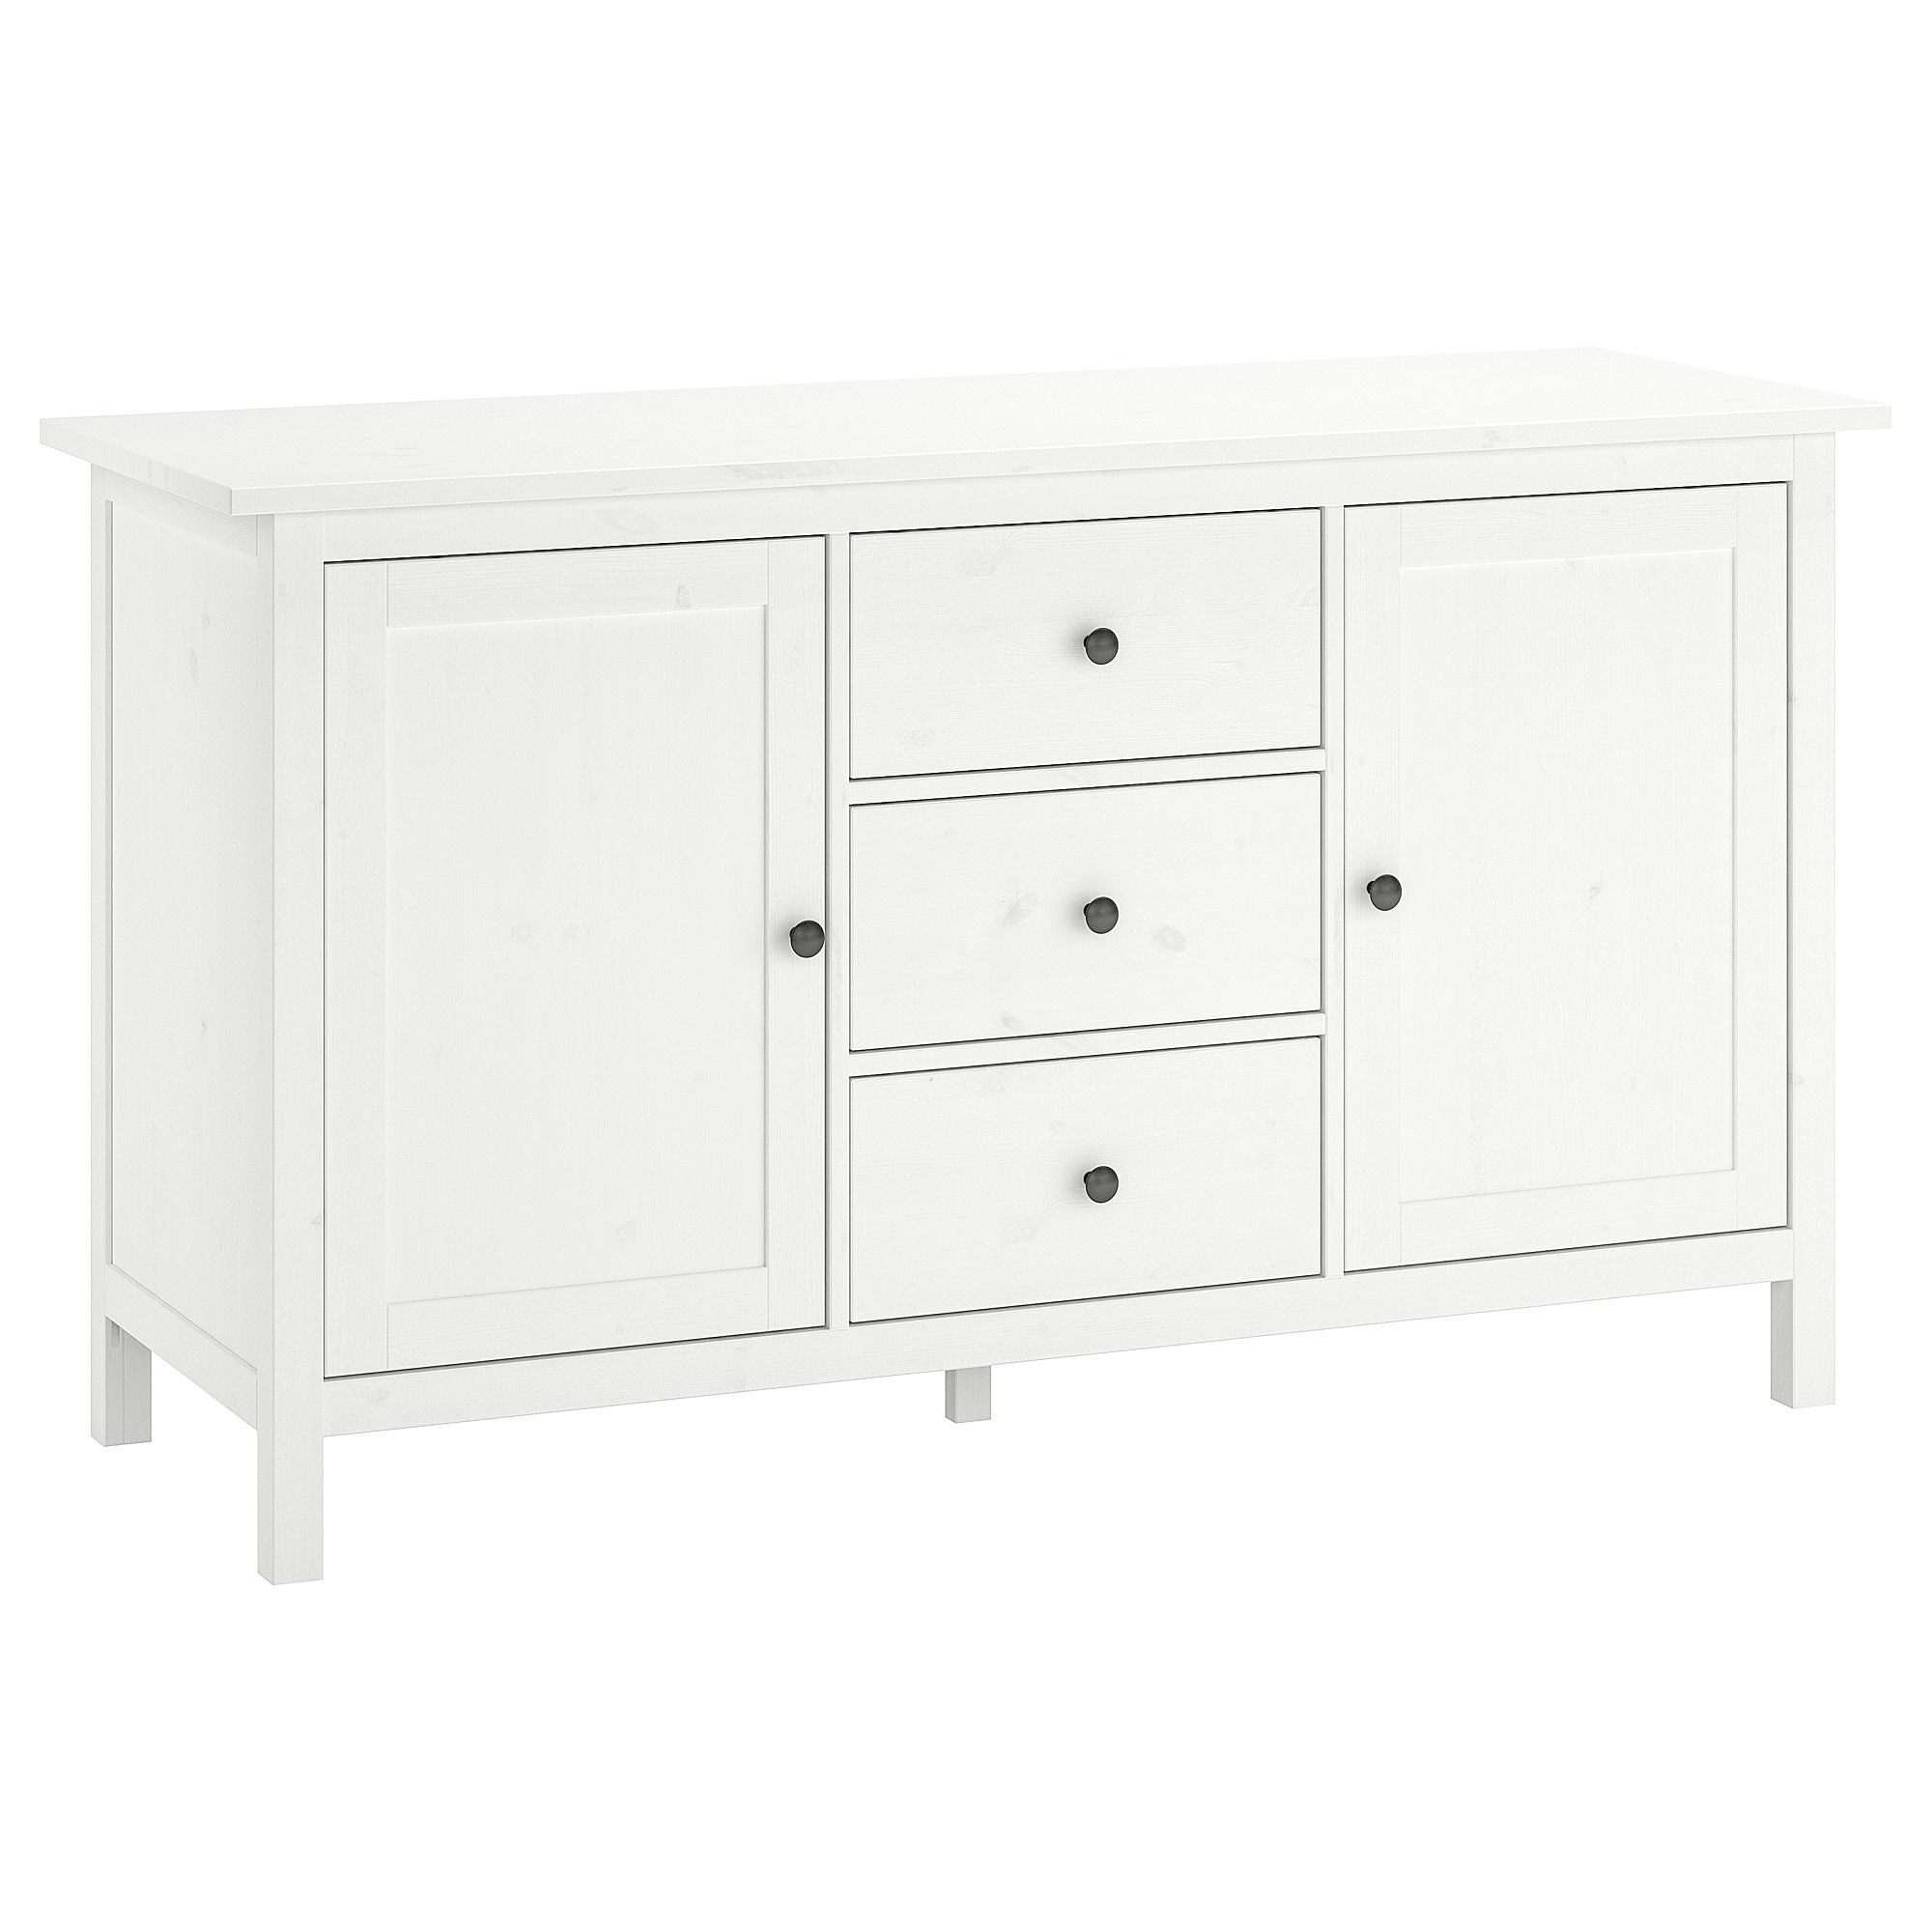 North York Sideboards With Regard To Latest Hemnes Sideboard – White Stain – Ikea (View 7 of 20)